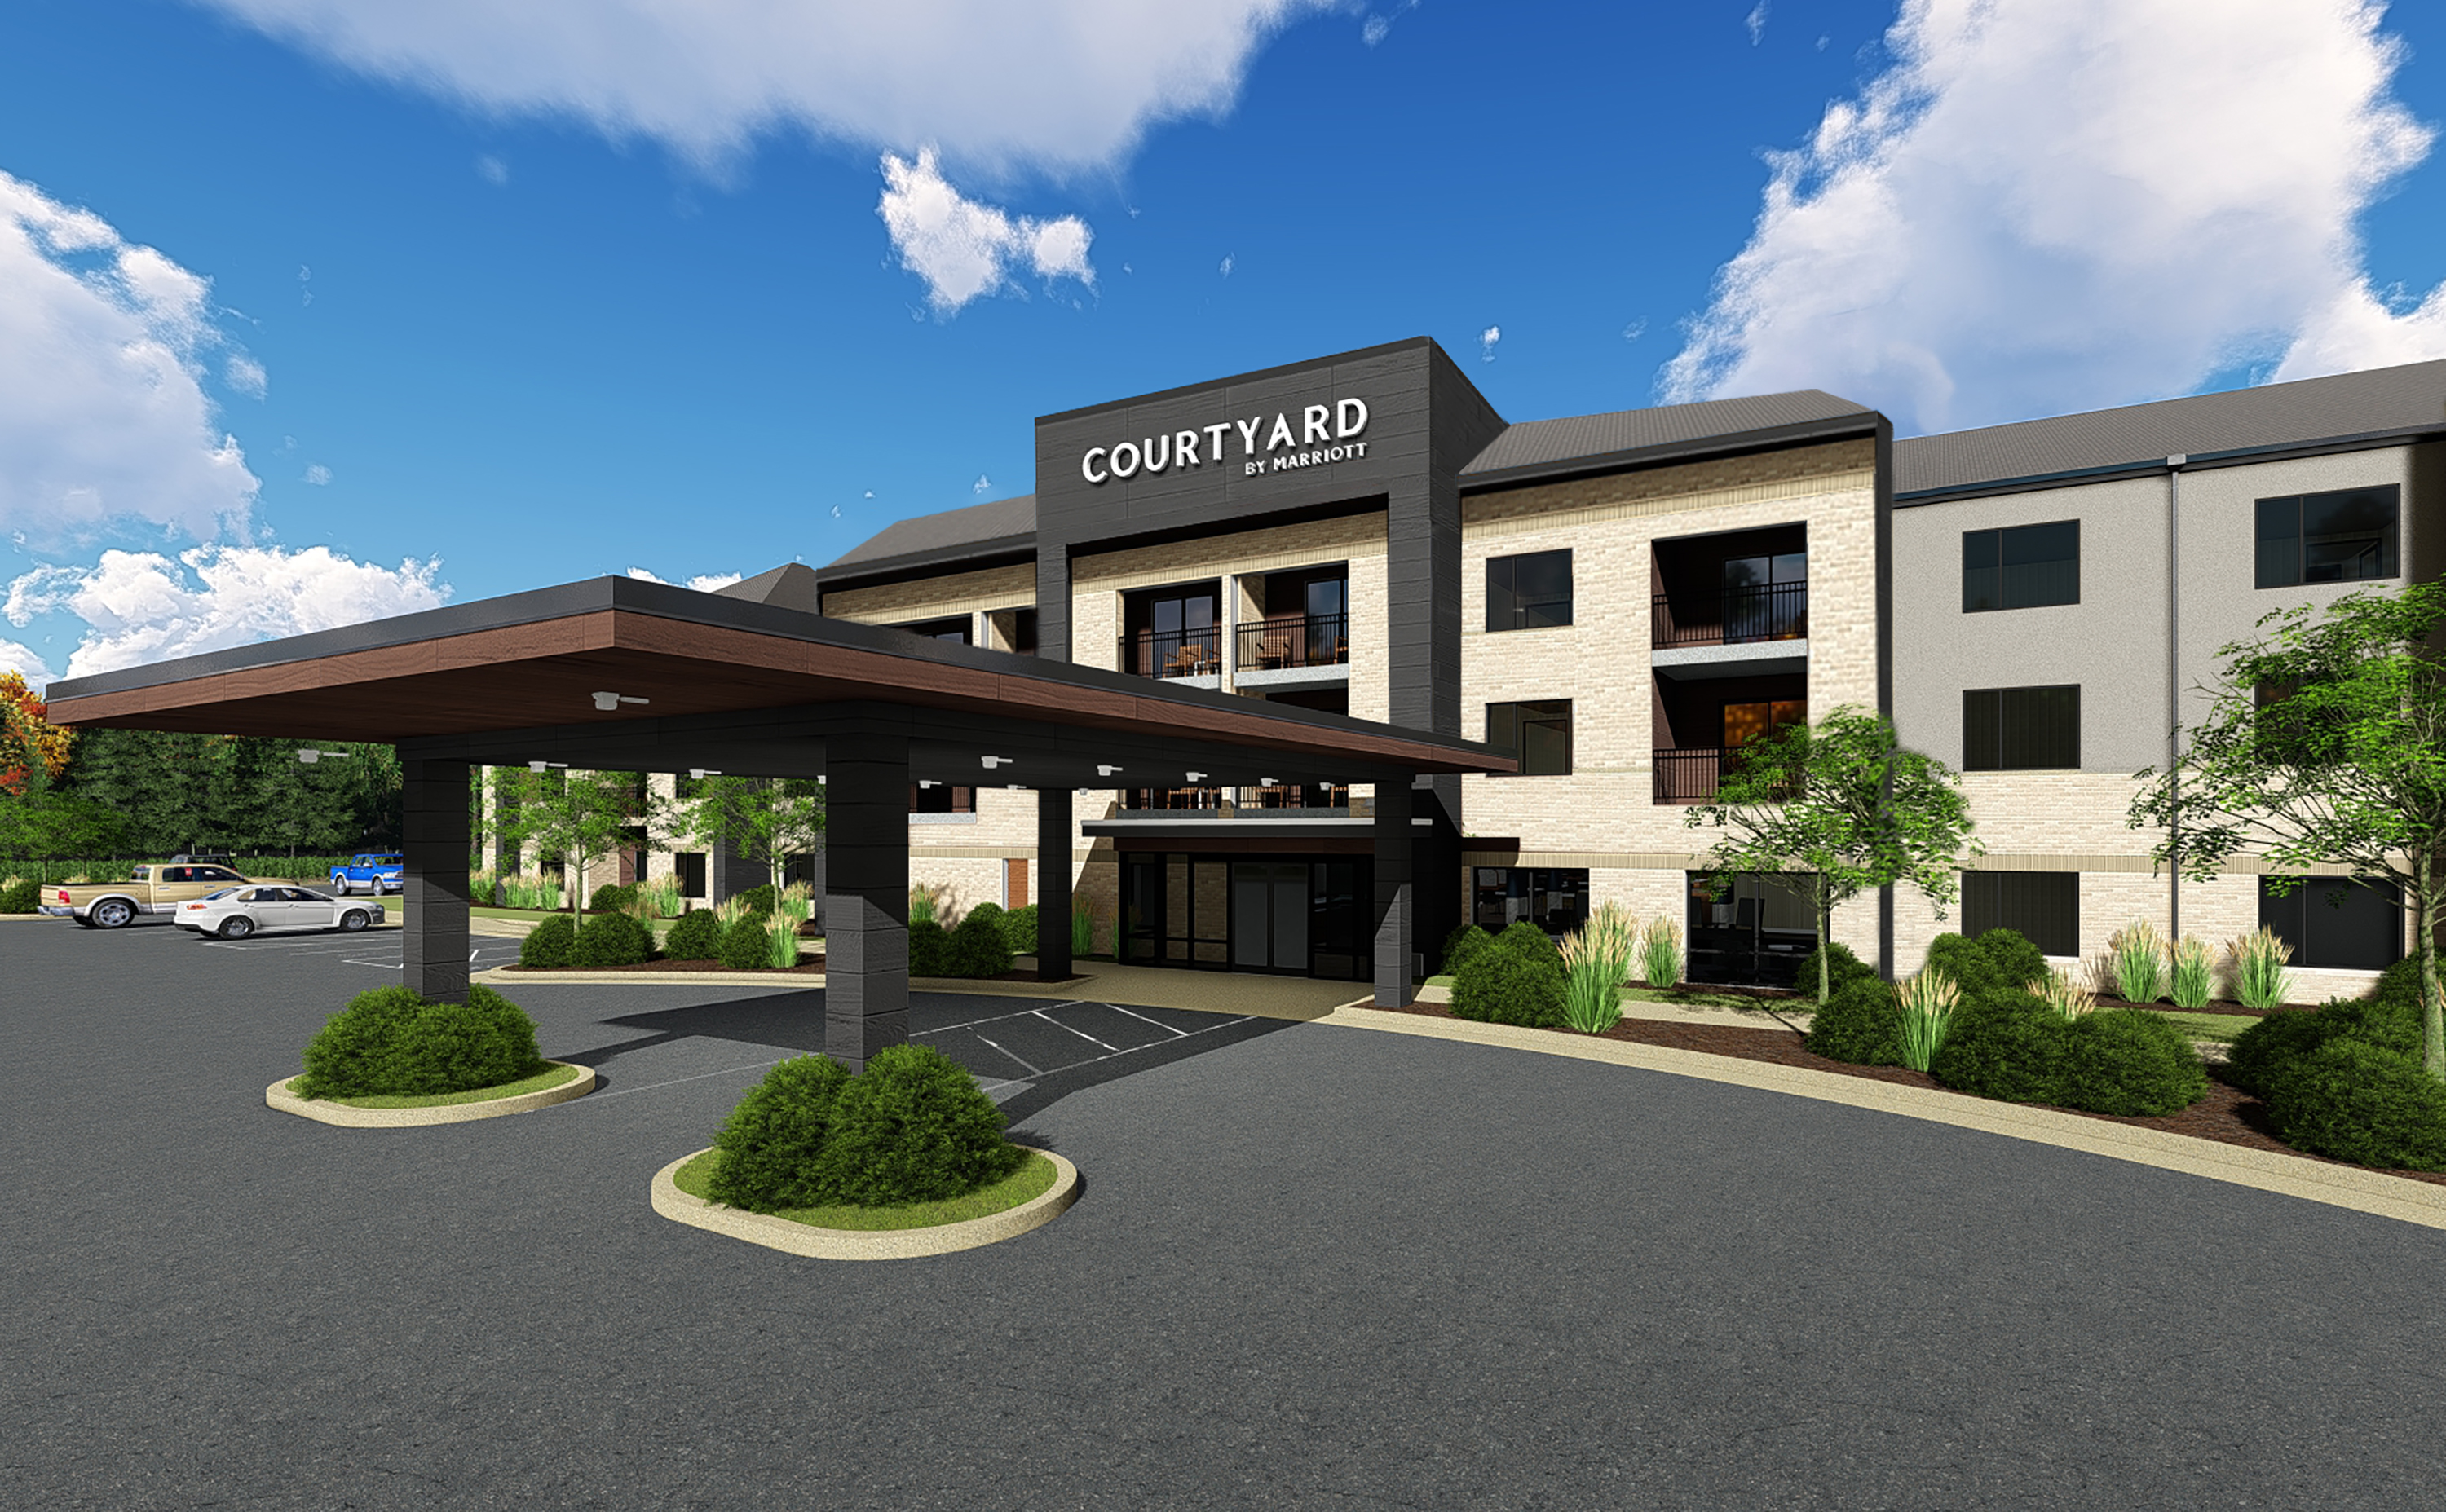 Courtyard by Marriott Wausau Undergoes Complete Modernization to Elevate the Guest Experience